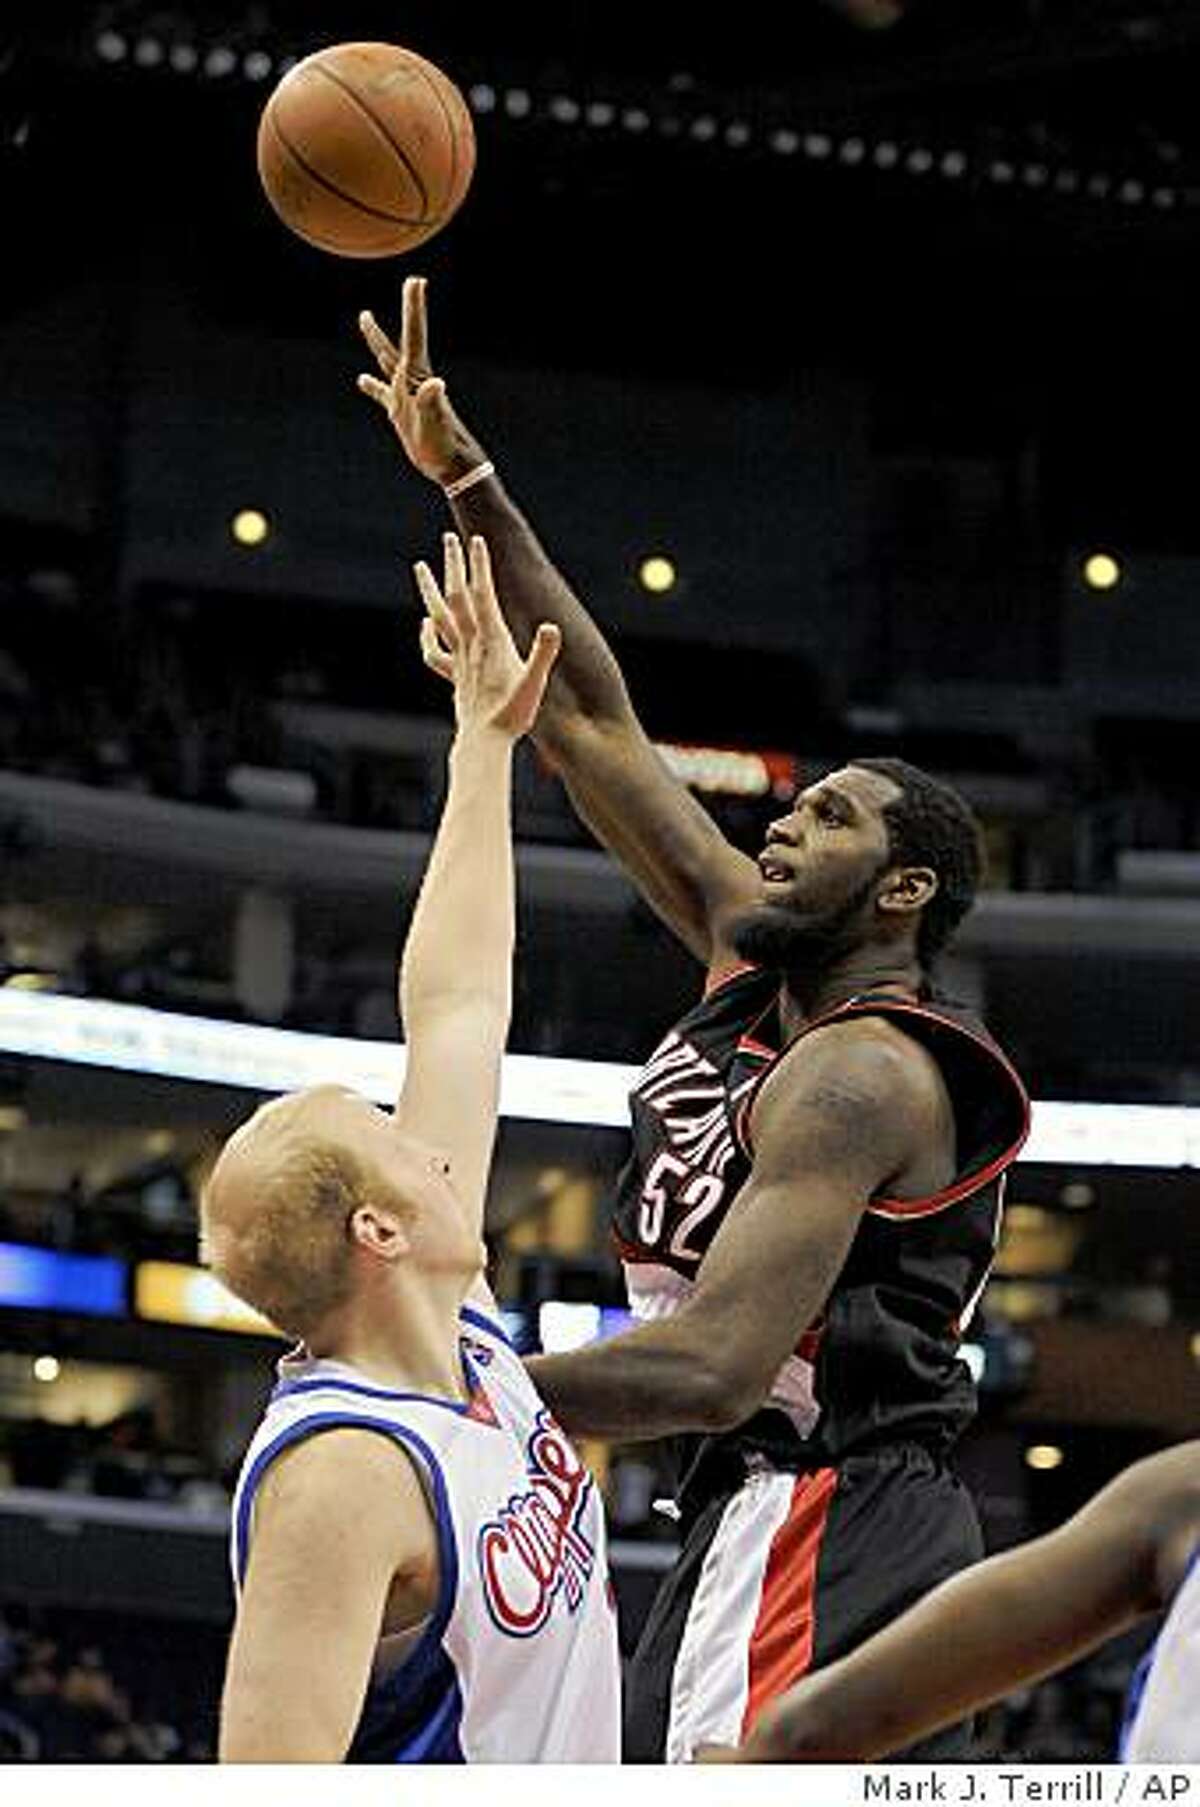 Blazers center Greg Oden puts up a shot as Los Angeles Clippers center Chris Kaman defends during the first half on Wednesday, Oct. 22, 2008, in Los Angeles.